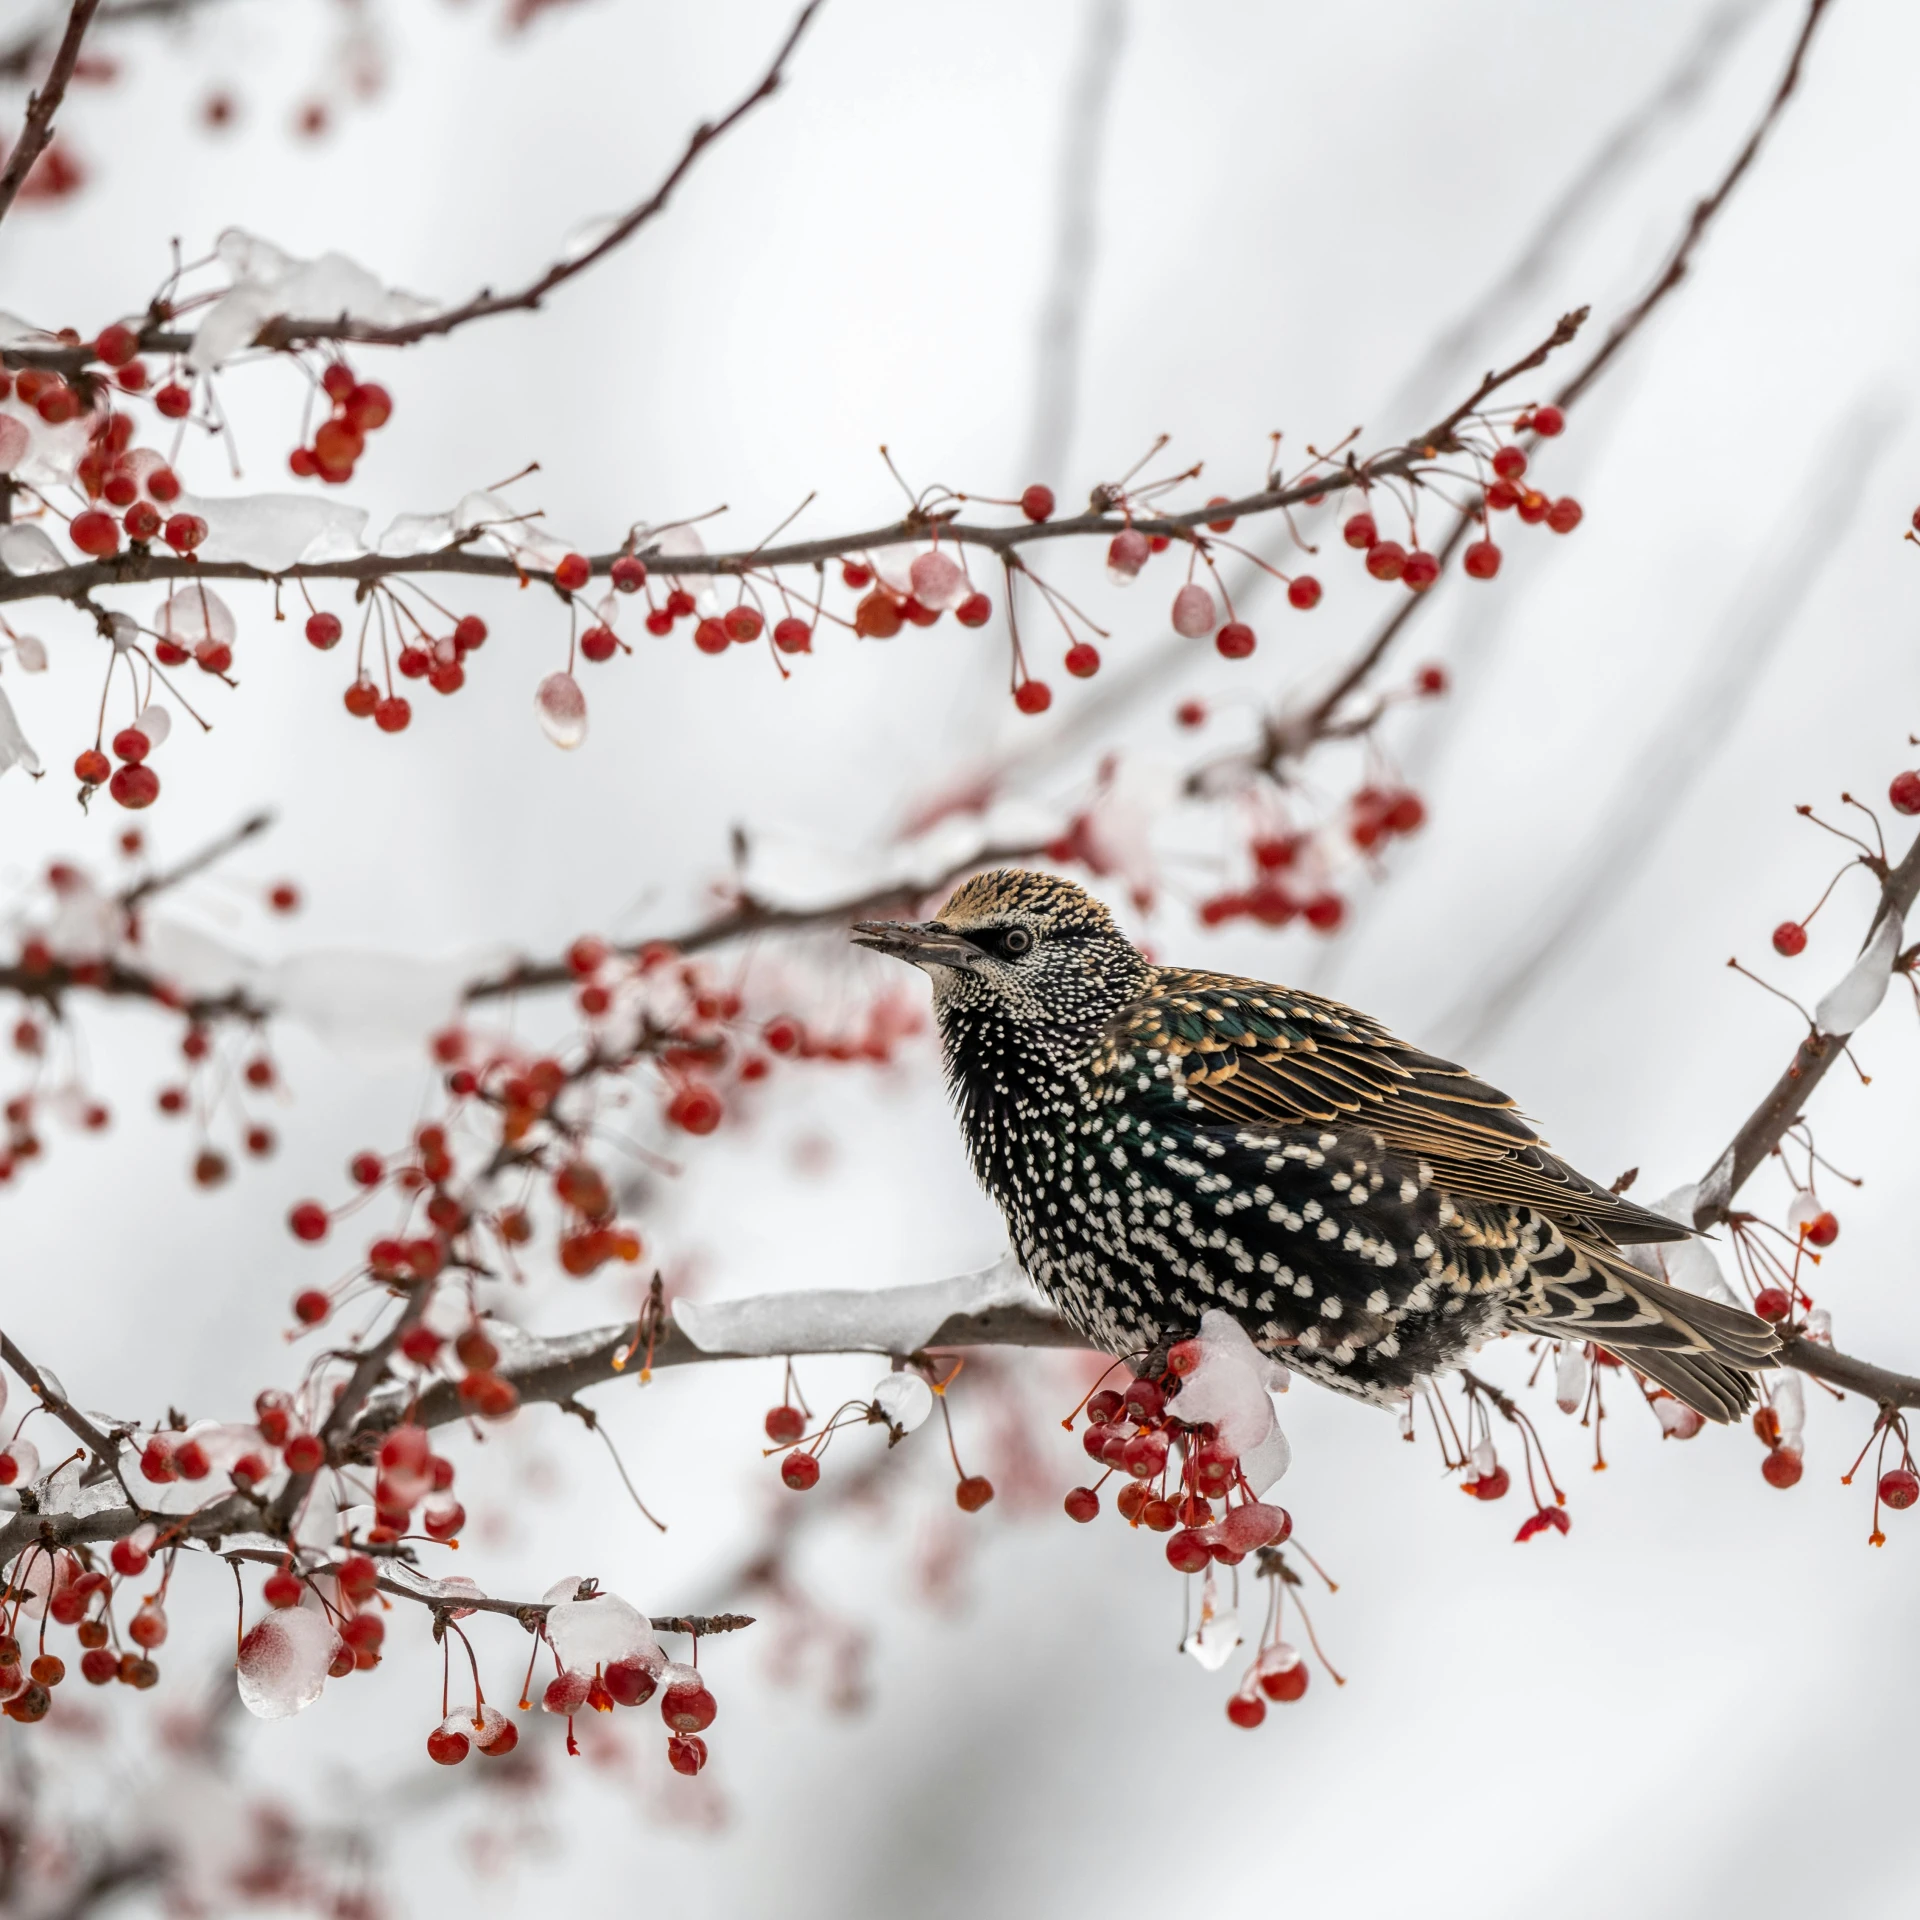 a bird sitting on top of a tree filled with red berries, in the winter, food, speckled, award-winning shot